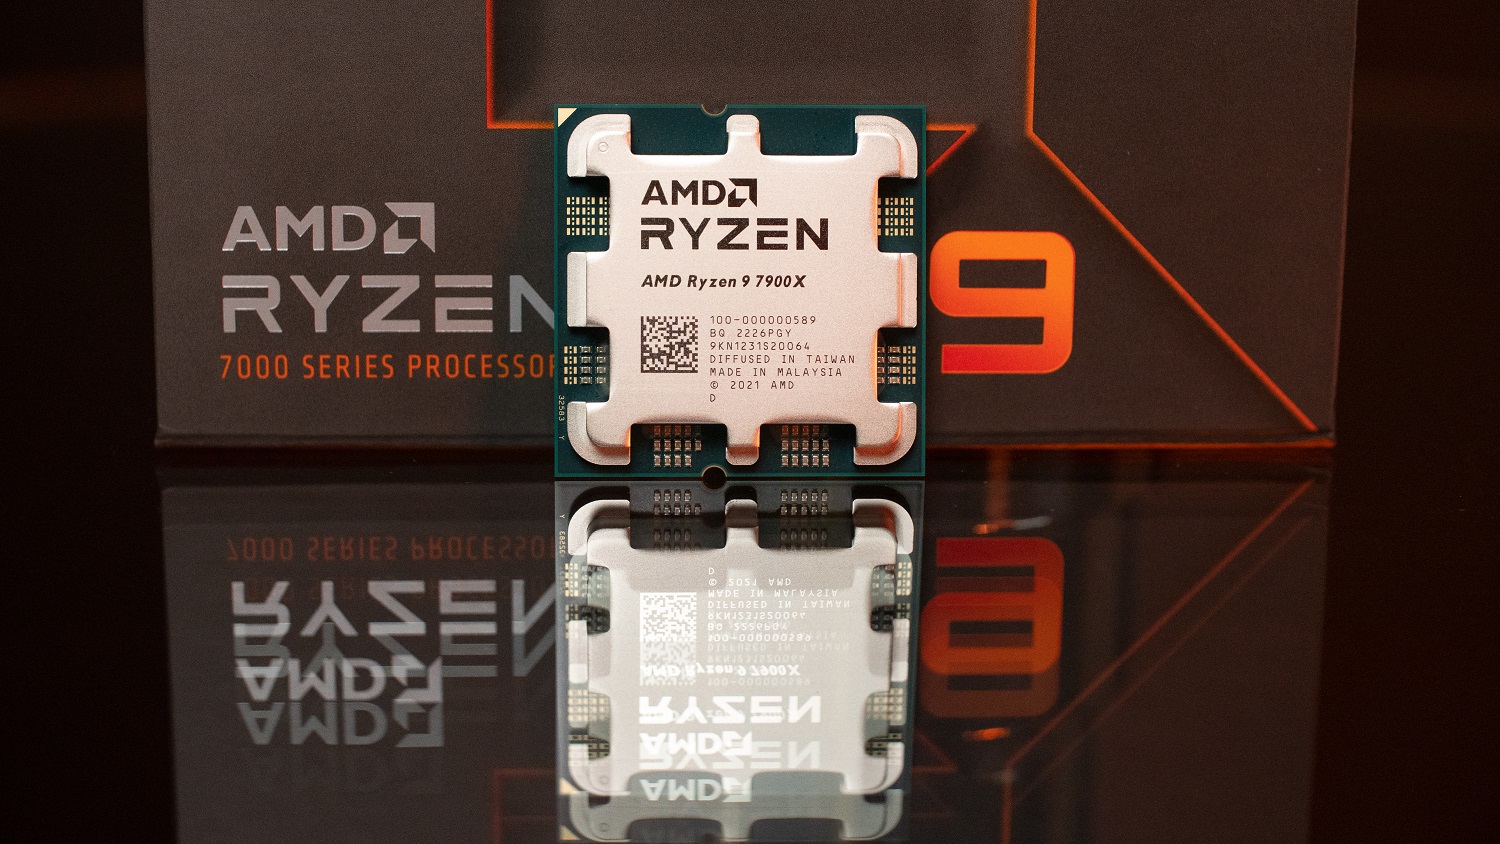 AMD Ryzen 9 7950X to offer 5.85 GHz boost beating Raptor Lake's